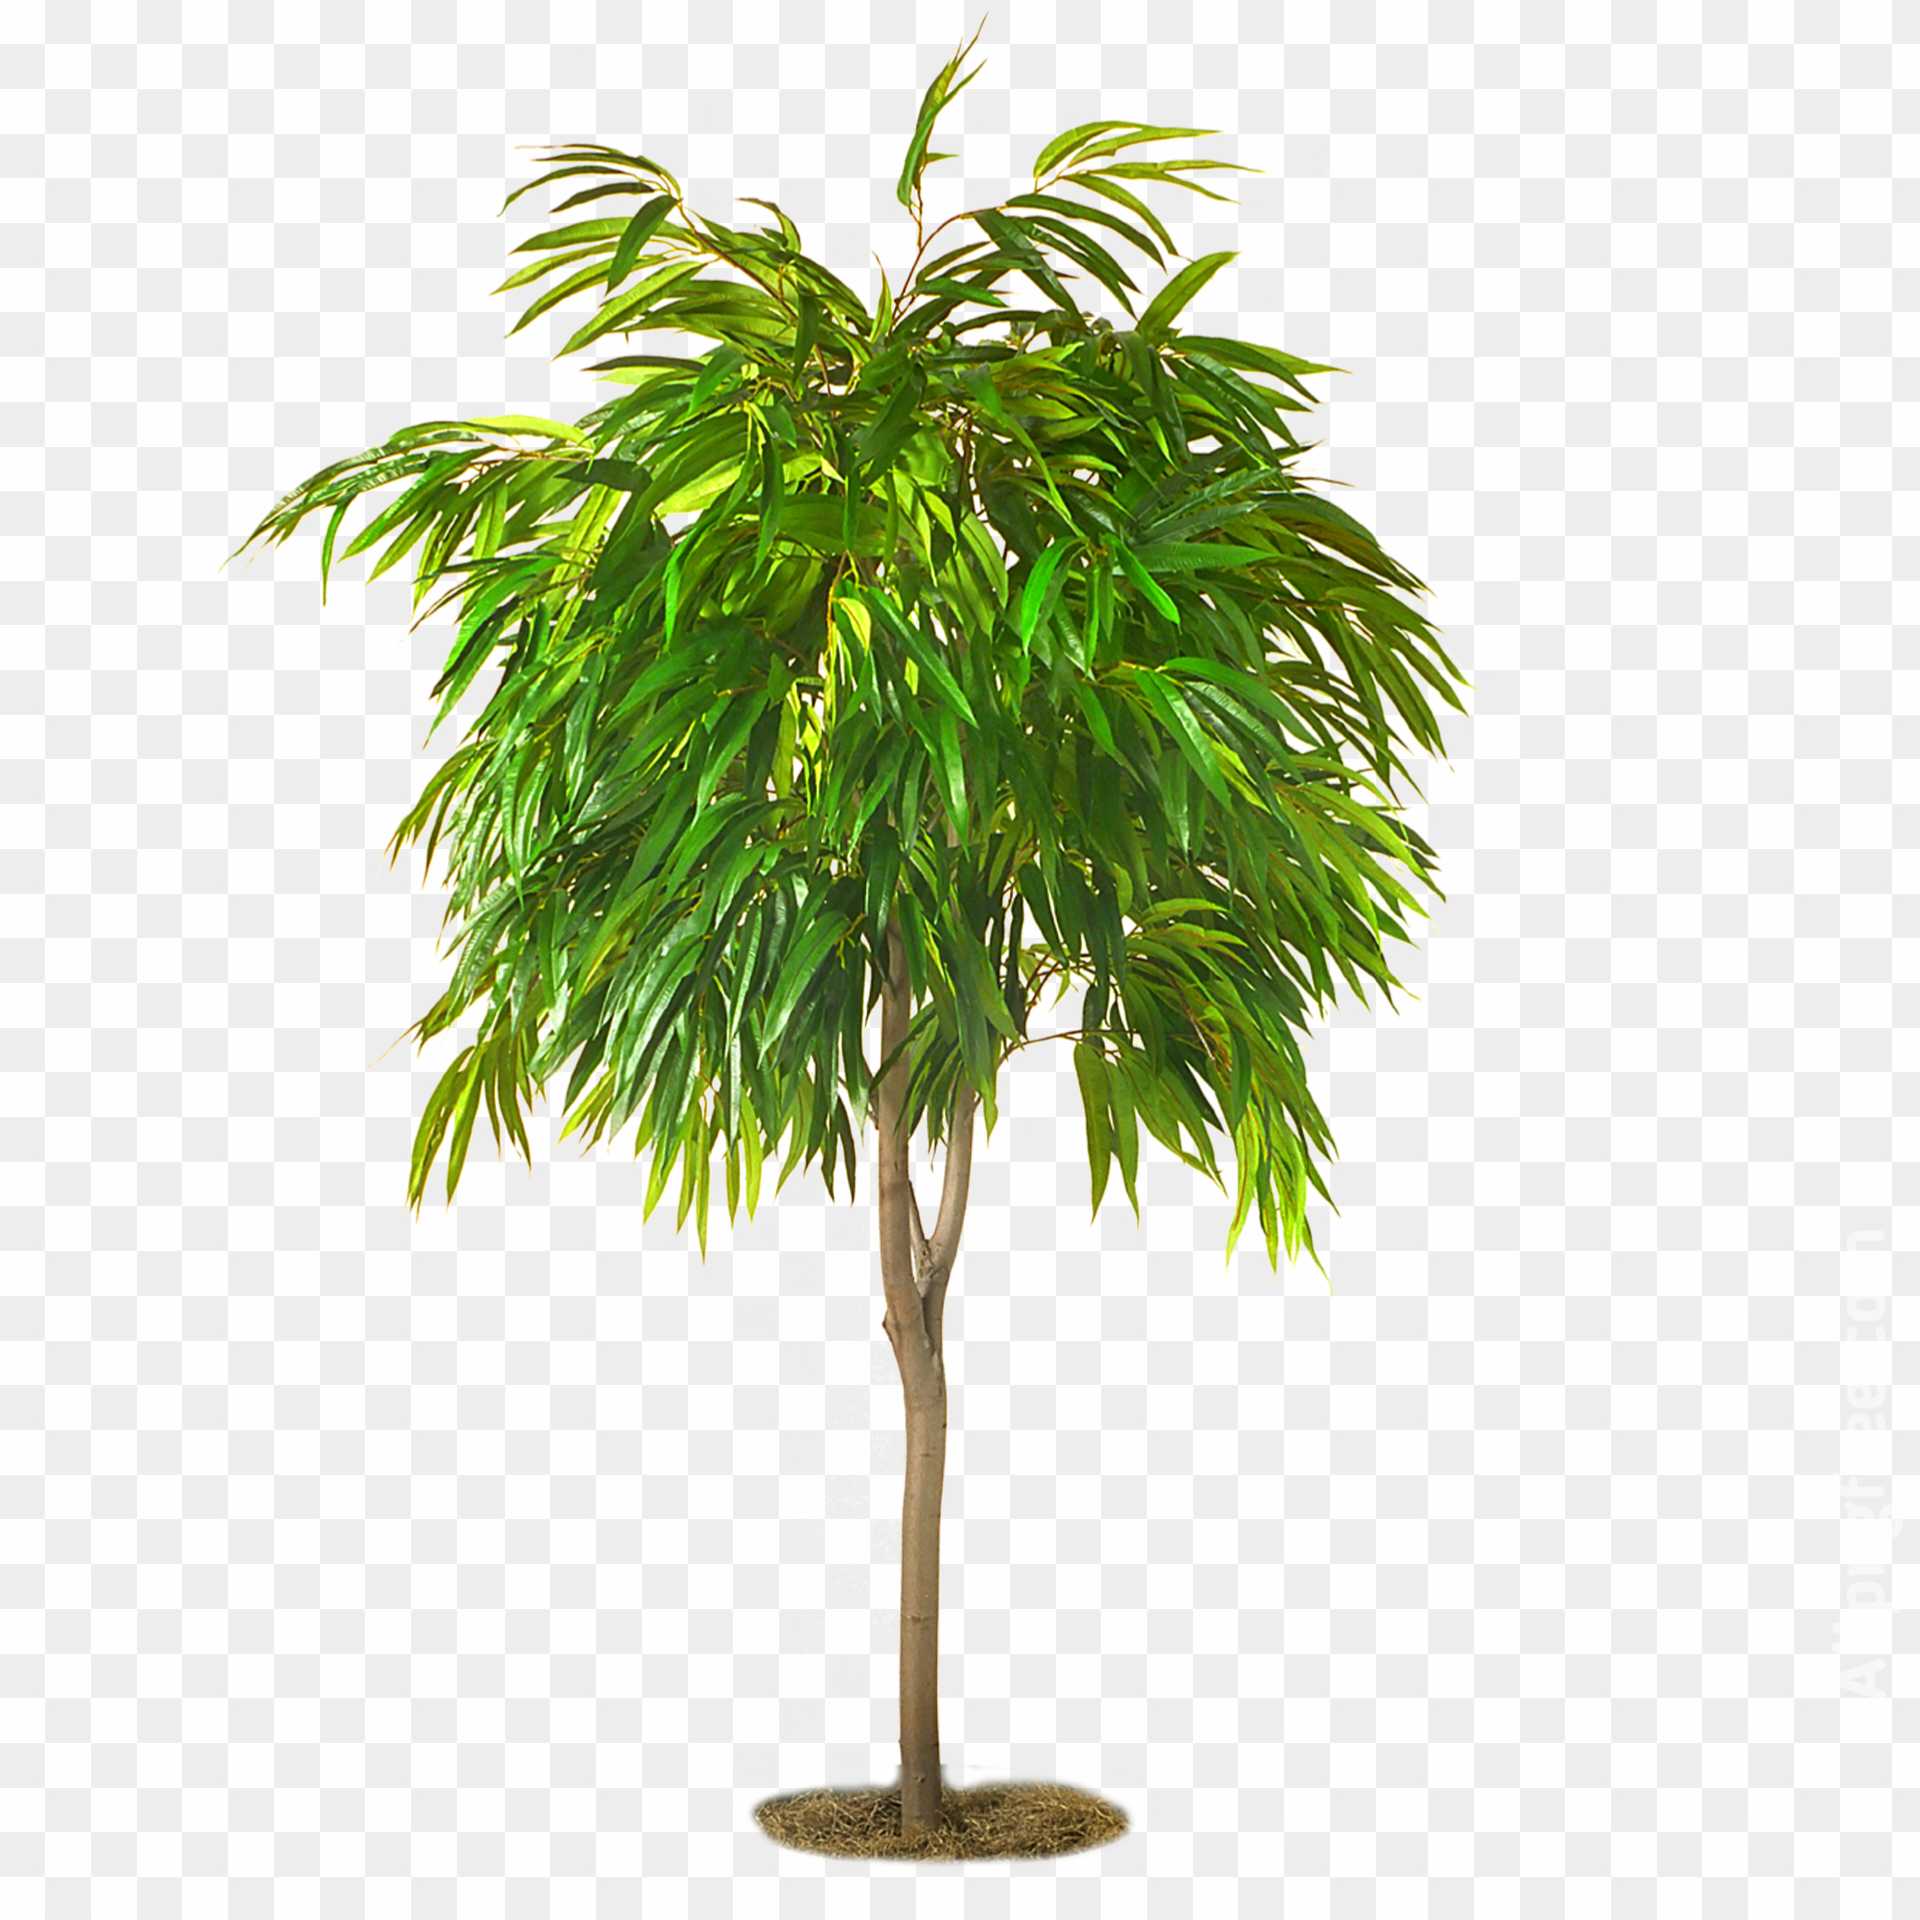 Tree PNG Images